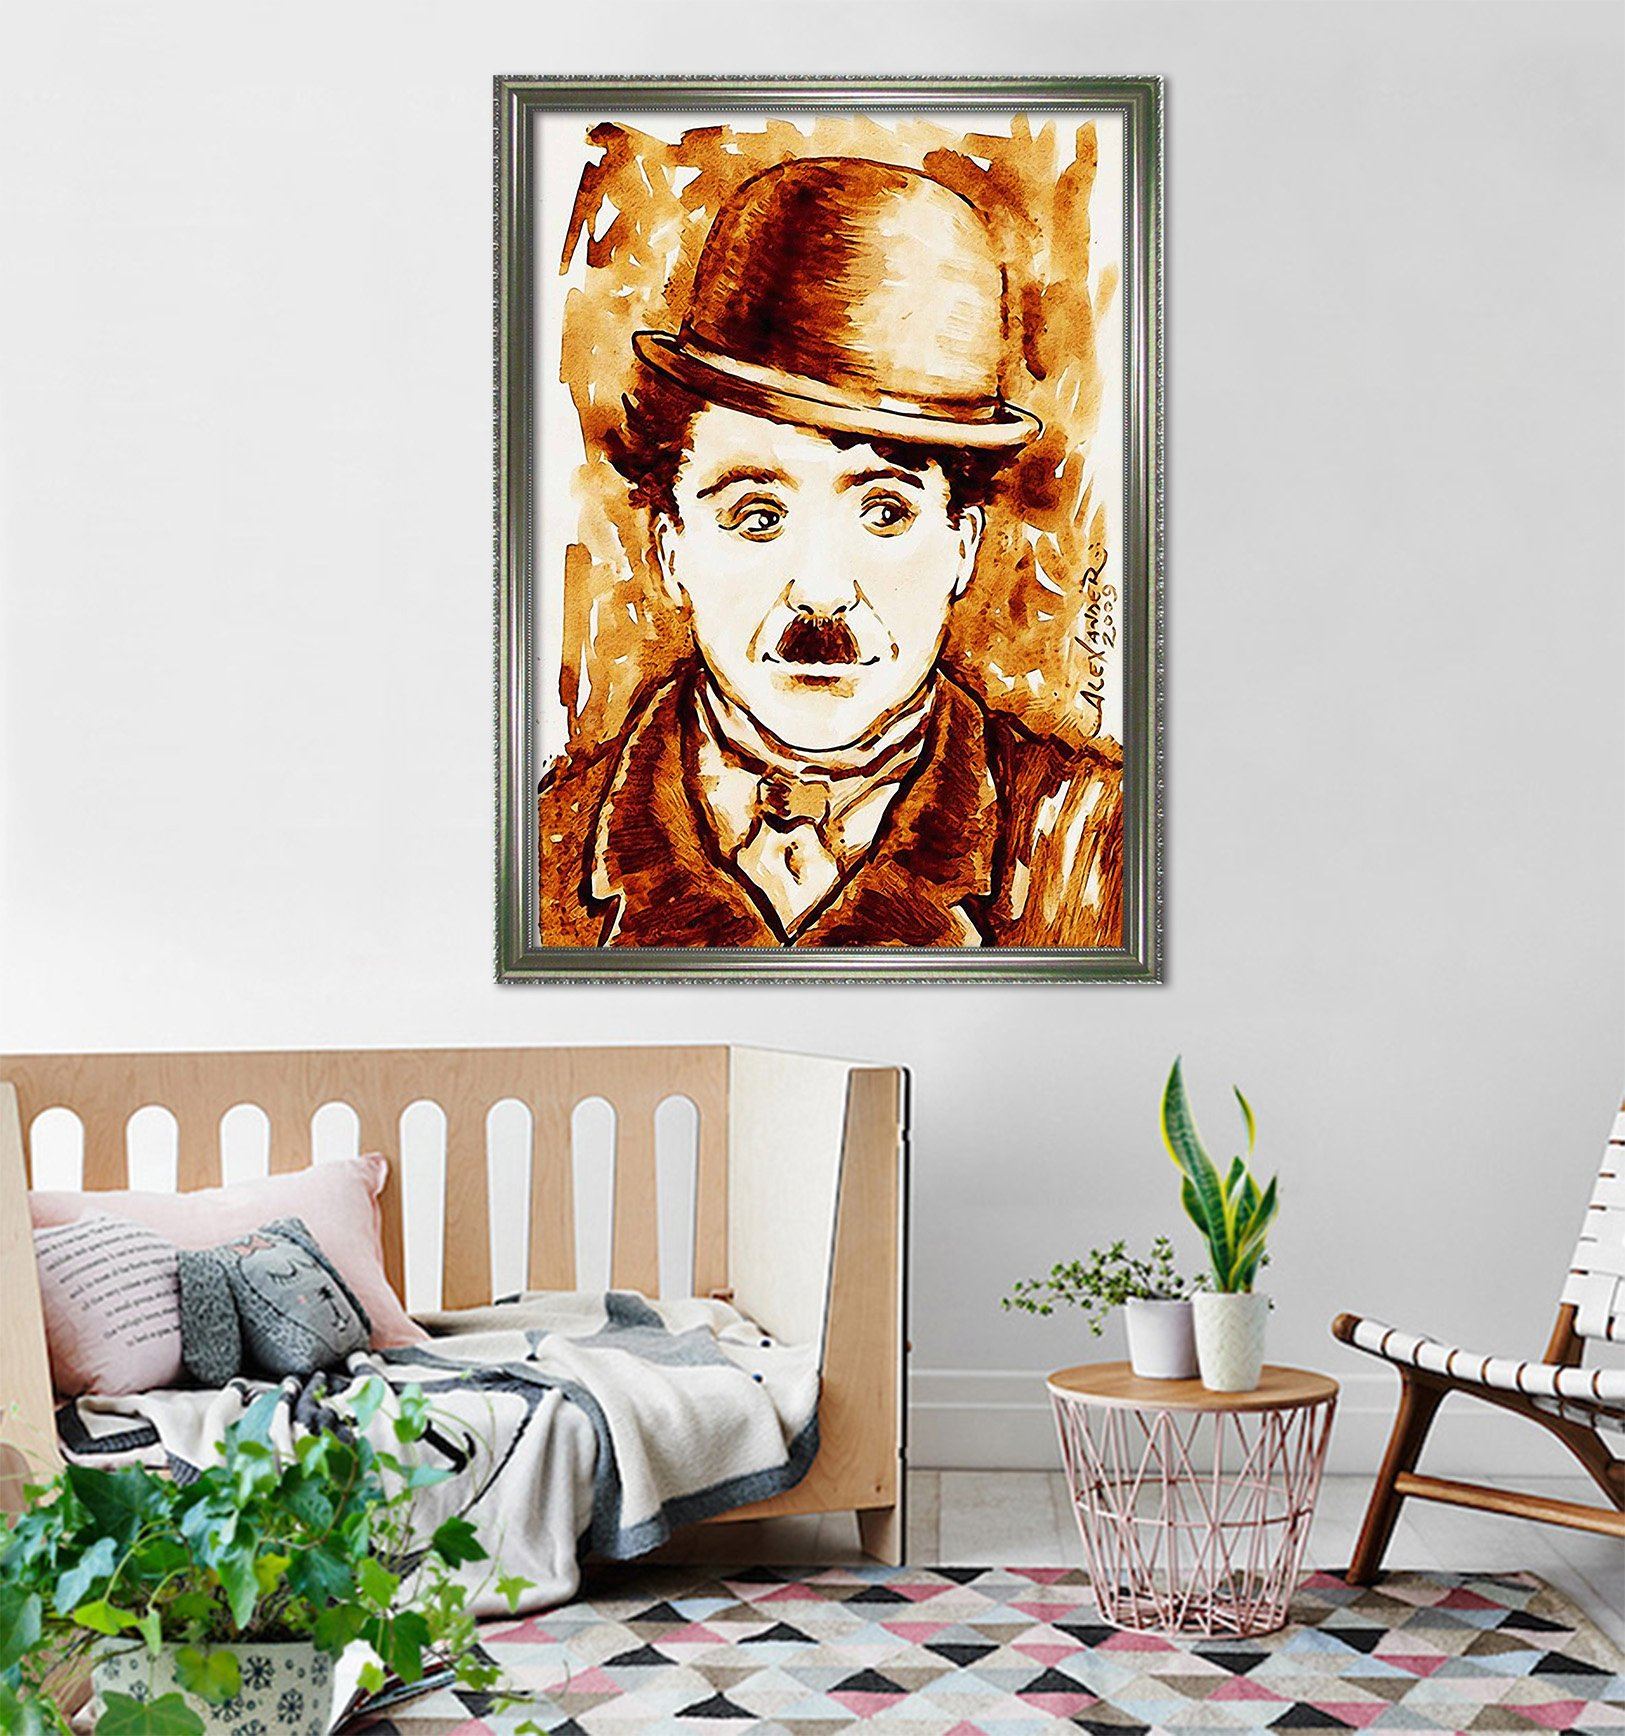 3D Master Of Mime 092 Fake Framed Print Painting Wallpaper AJ Creativity Home 